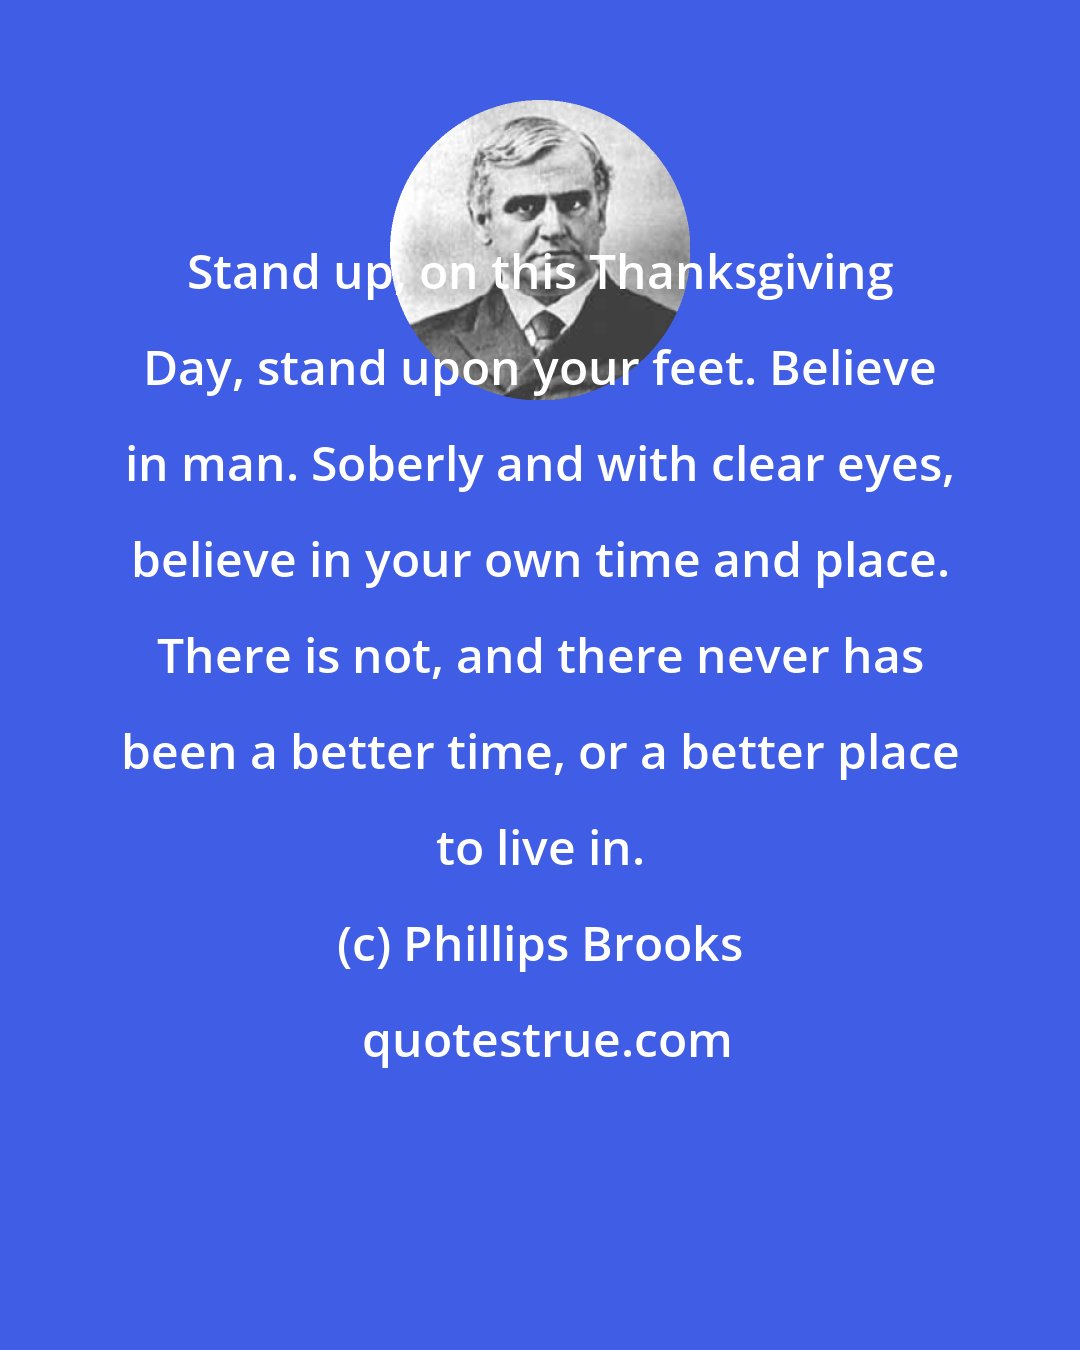 Phillips Brooks: Stand up, on this Thanksgiving Day, stand upon your feet. Believe in man. Soberly and with clear eyes, believe in your own time and place. There is not, and there never has been a better time, or a better place to live in.